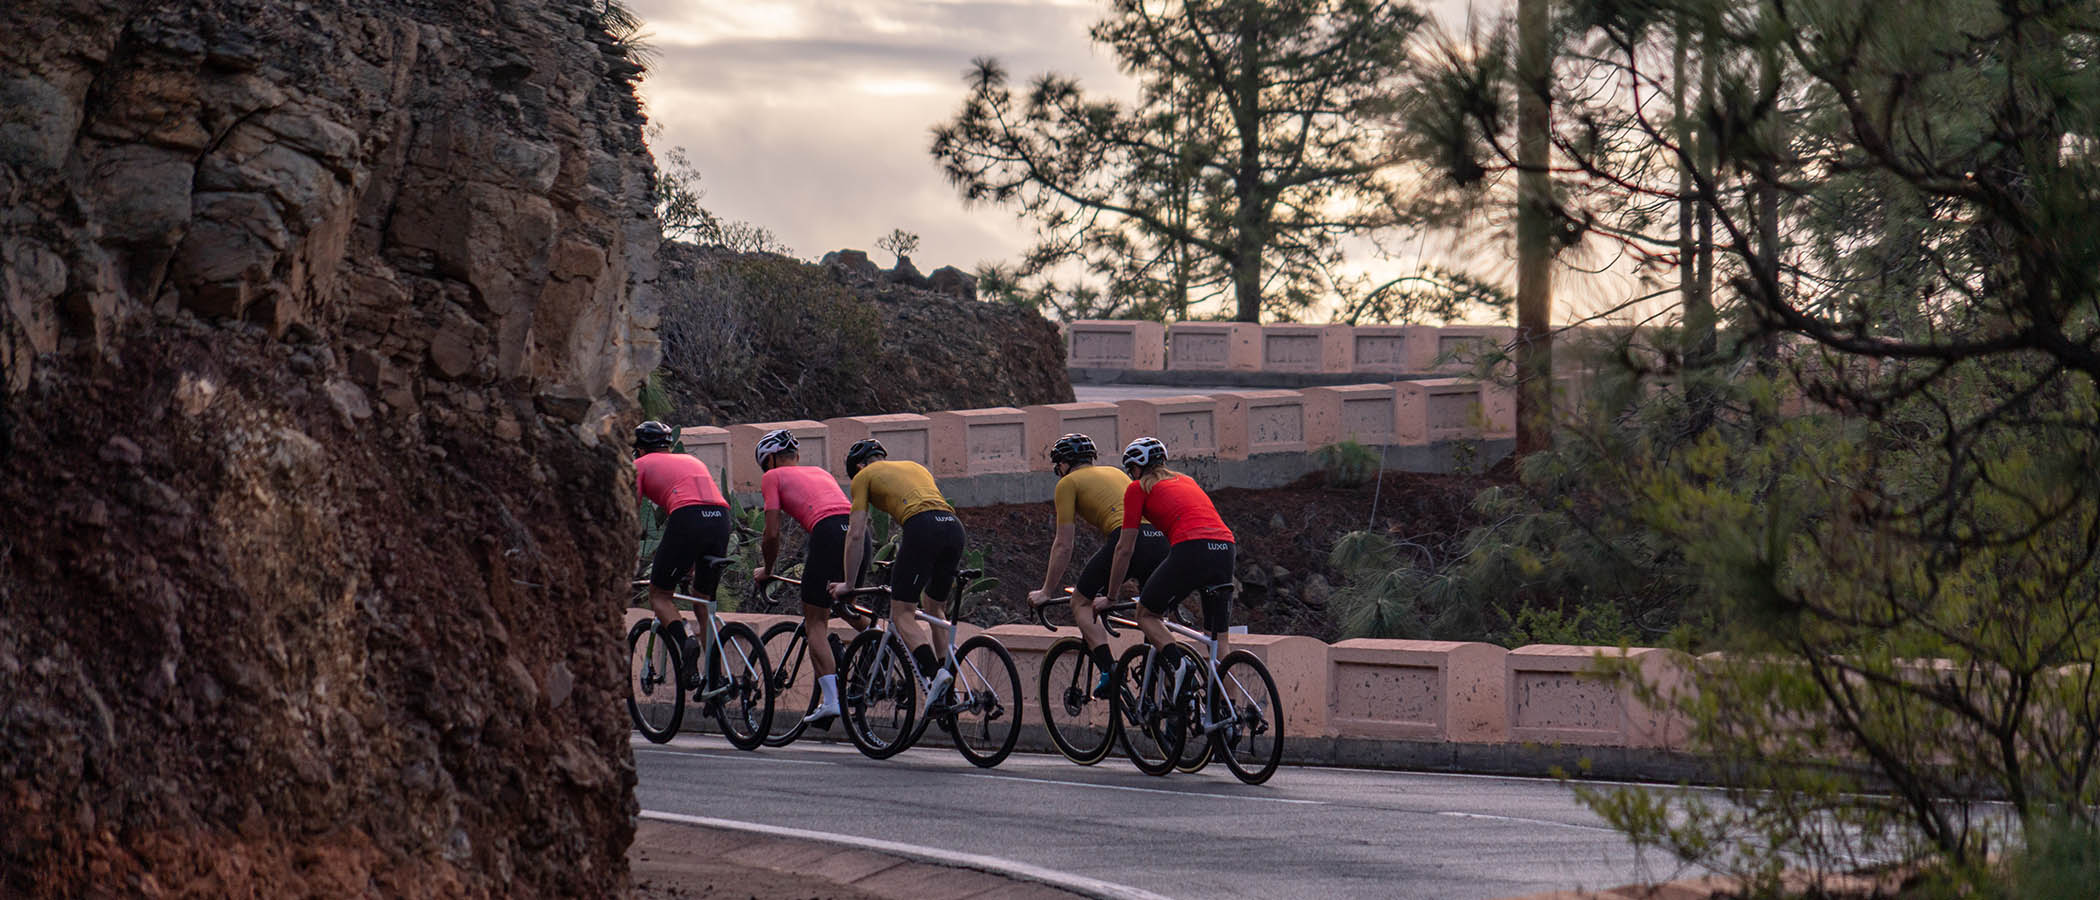 sunrise cycling in Tenerife with Luxa jerseys